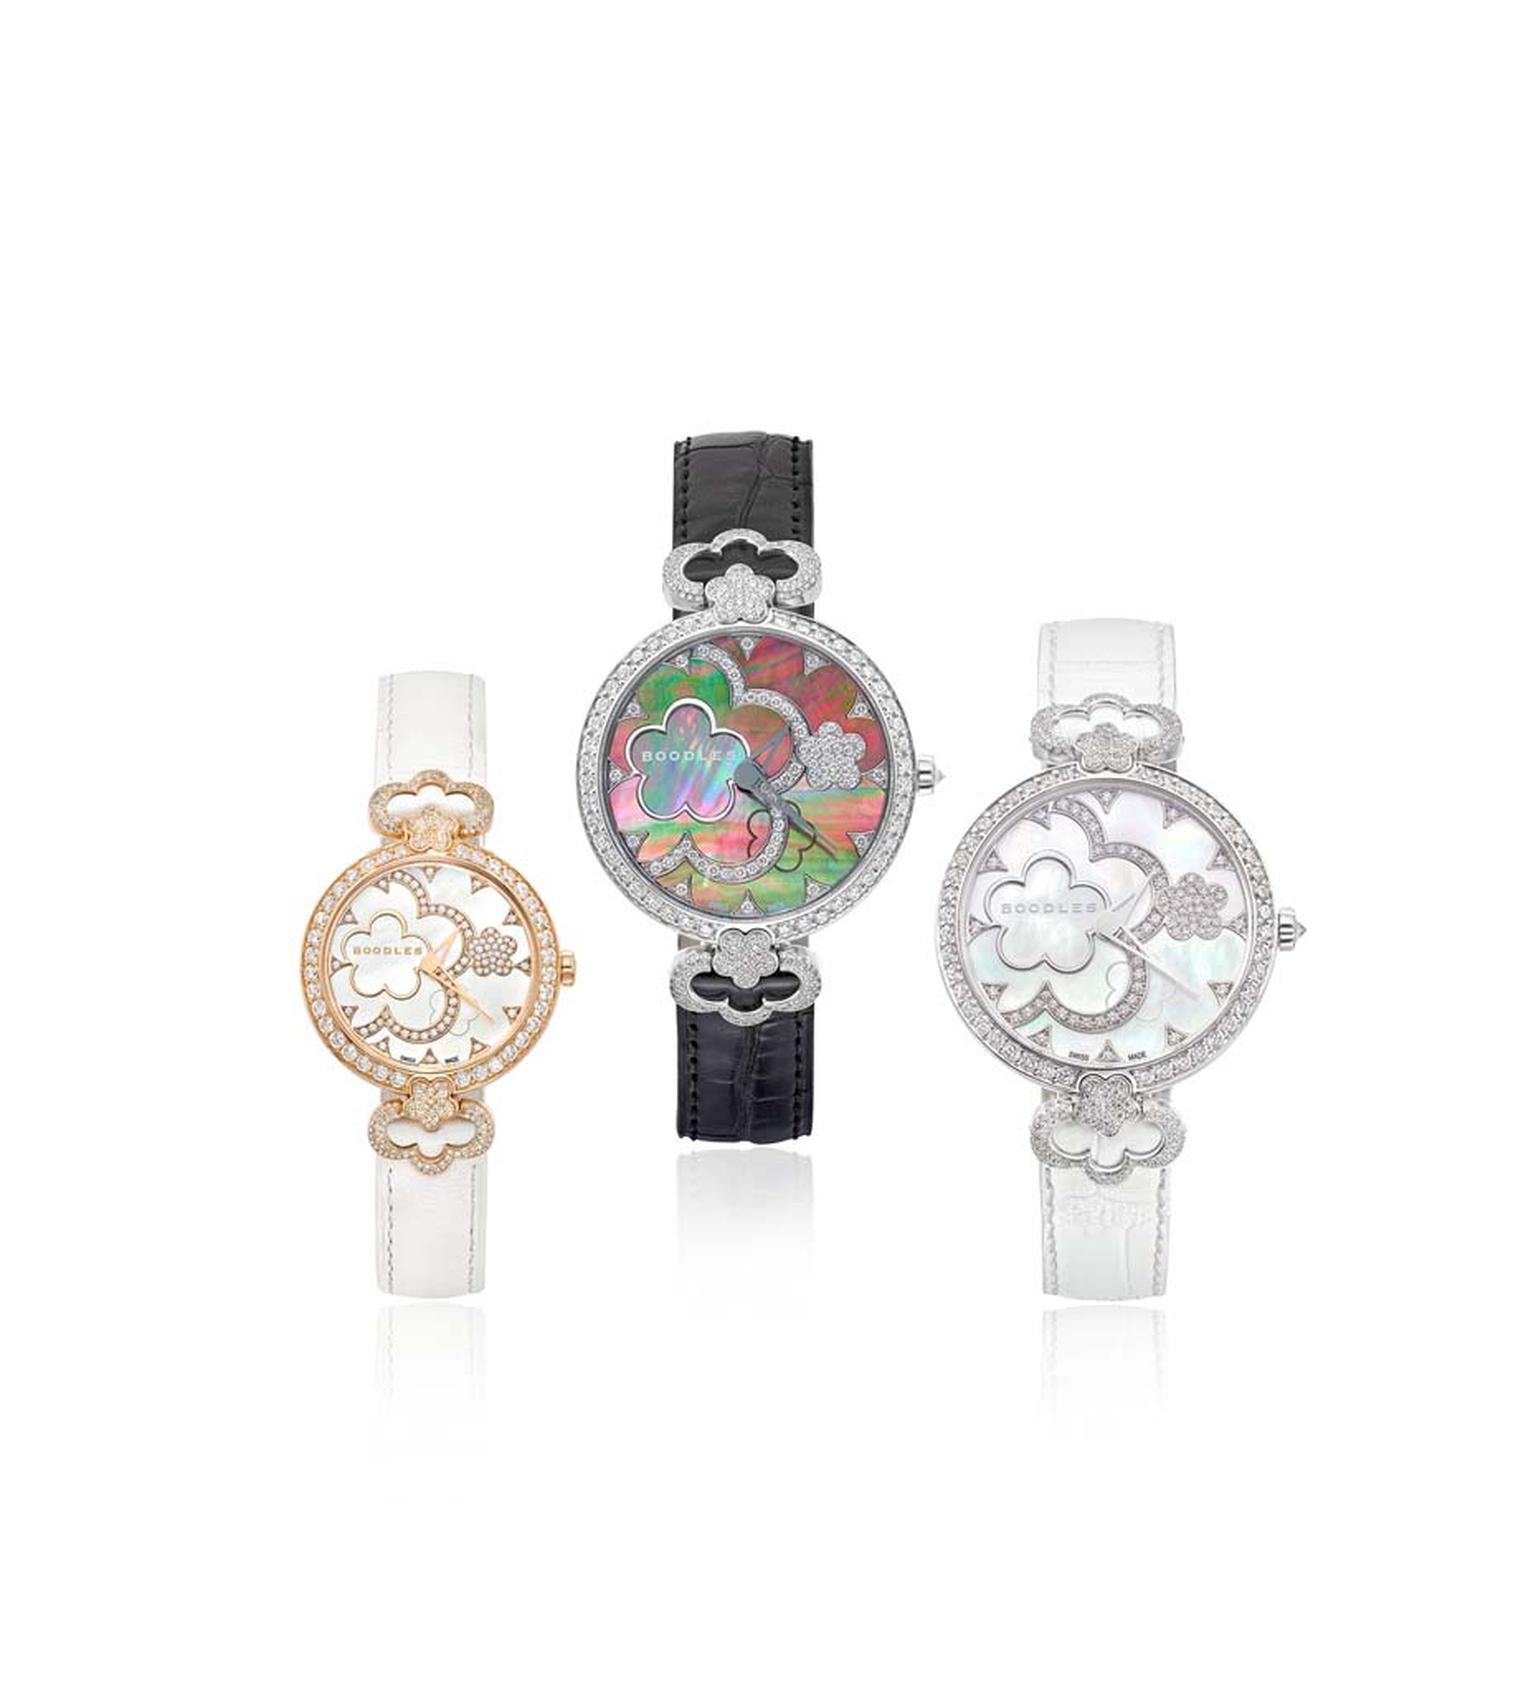 Boodles Blossom watches come in either s 37mm full-set diamond watch with 403 diamonds totalling almost 3ct and a smaller 28mm watch with 350 diamonds totalling almost 2ct.